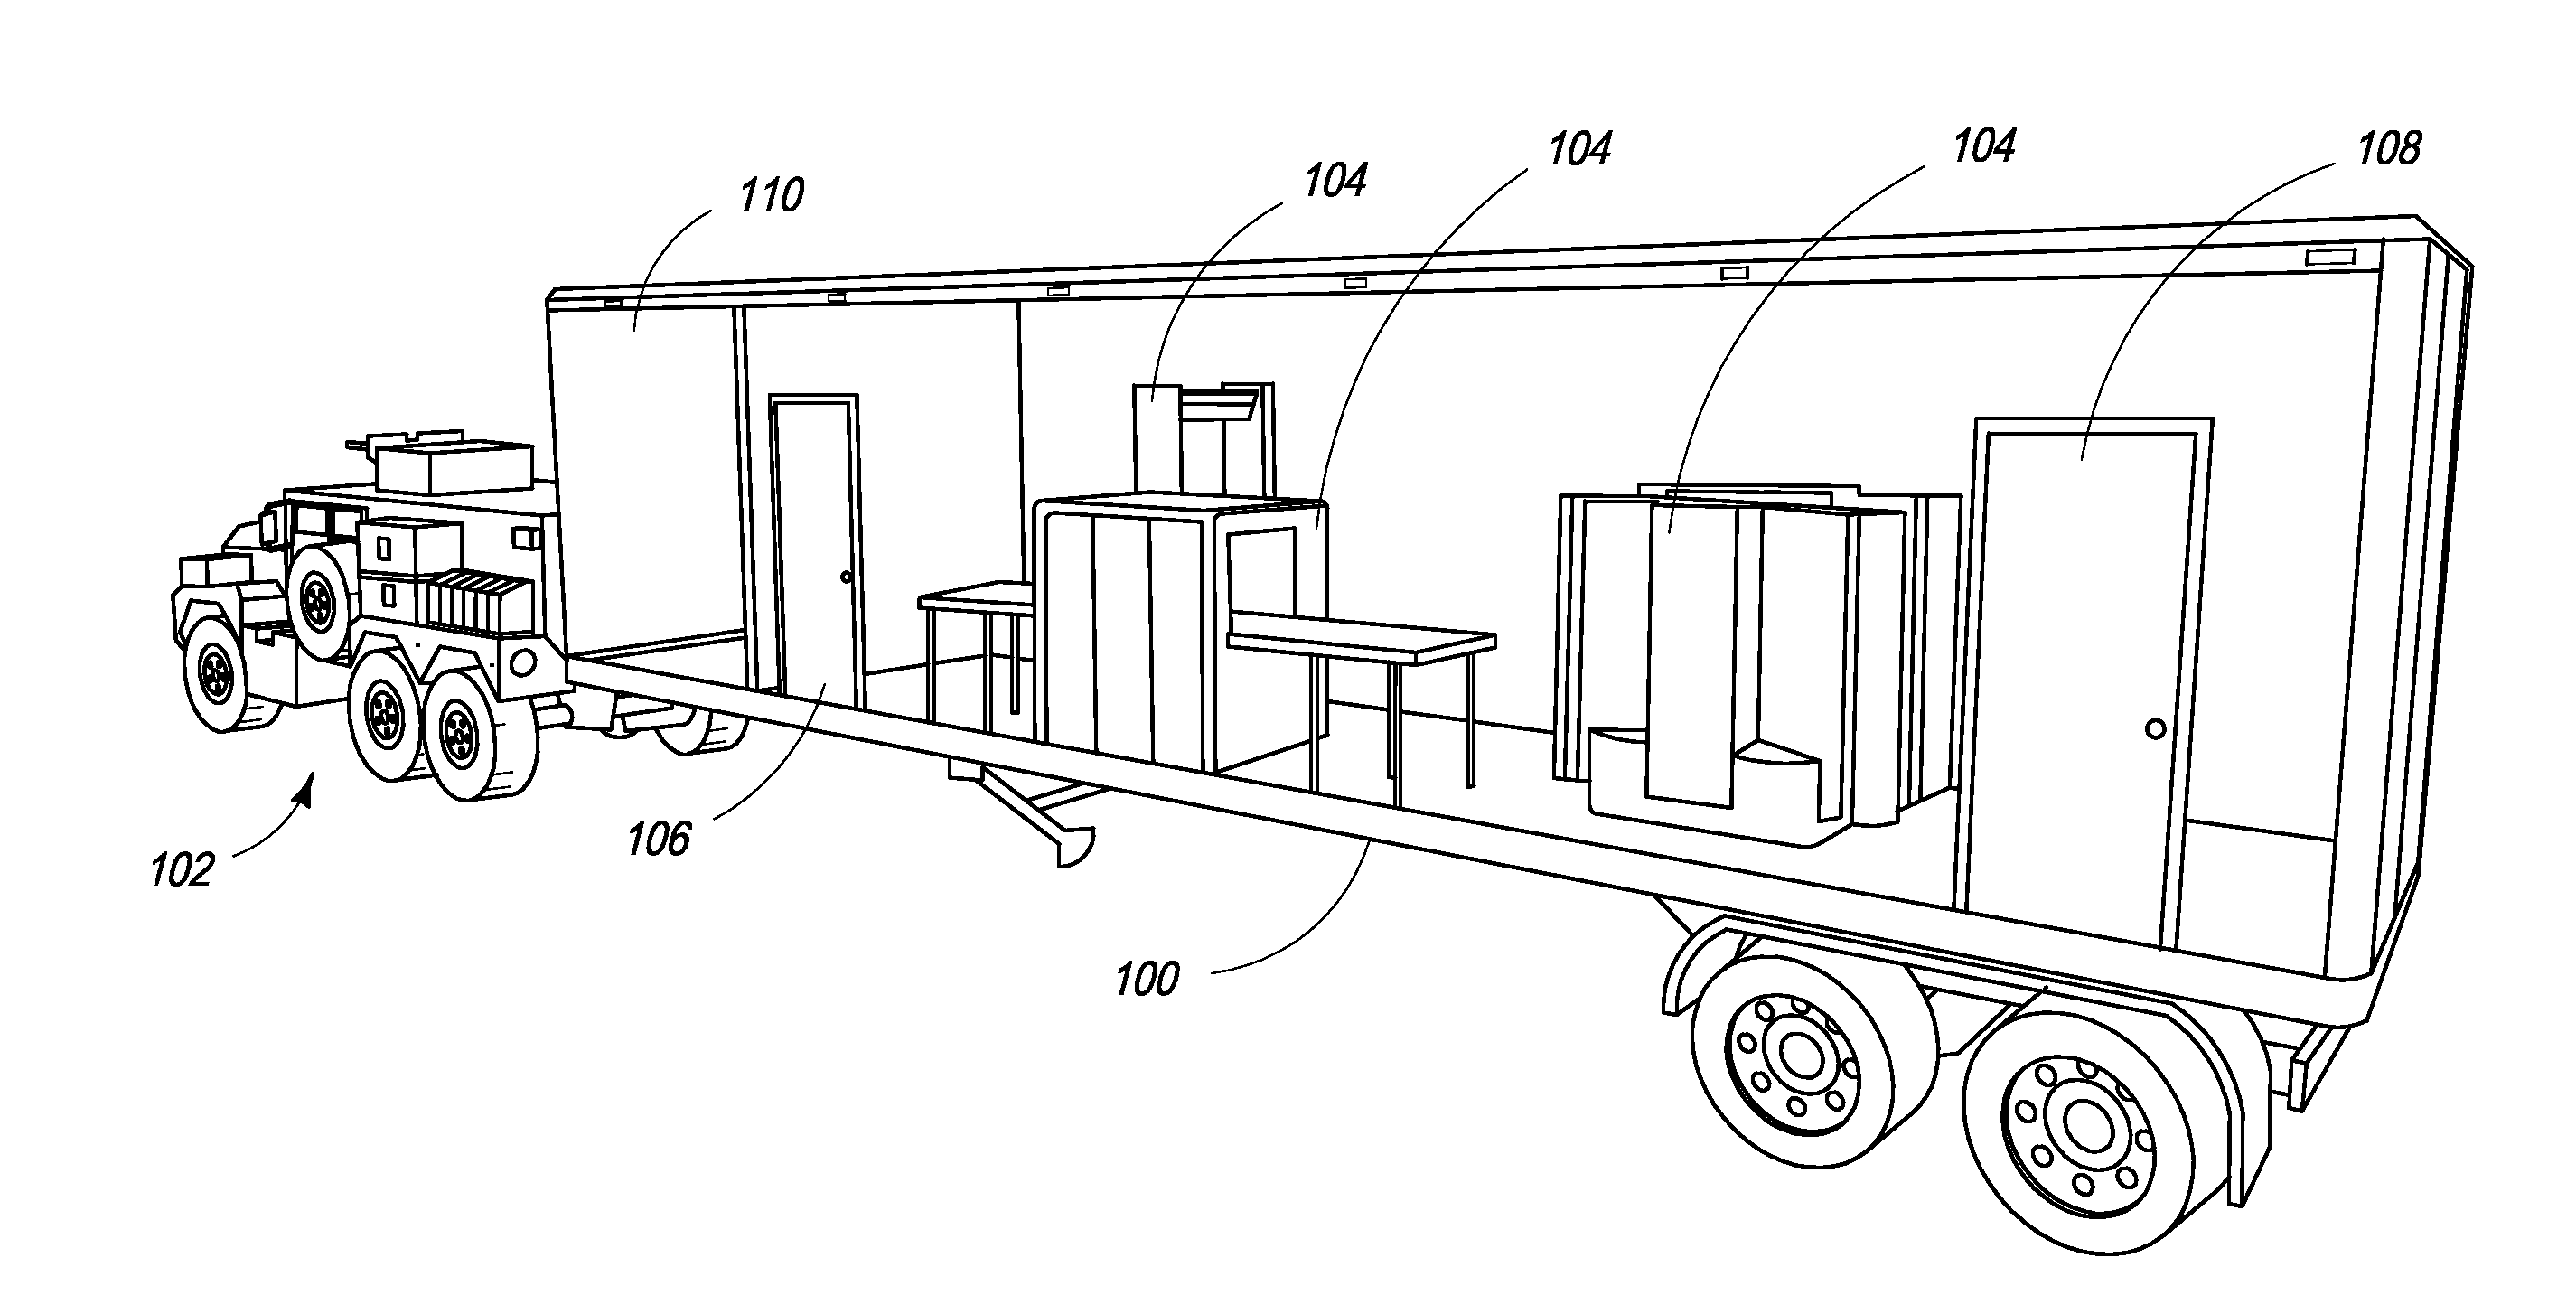 Integrated portable checkpoint system